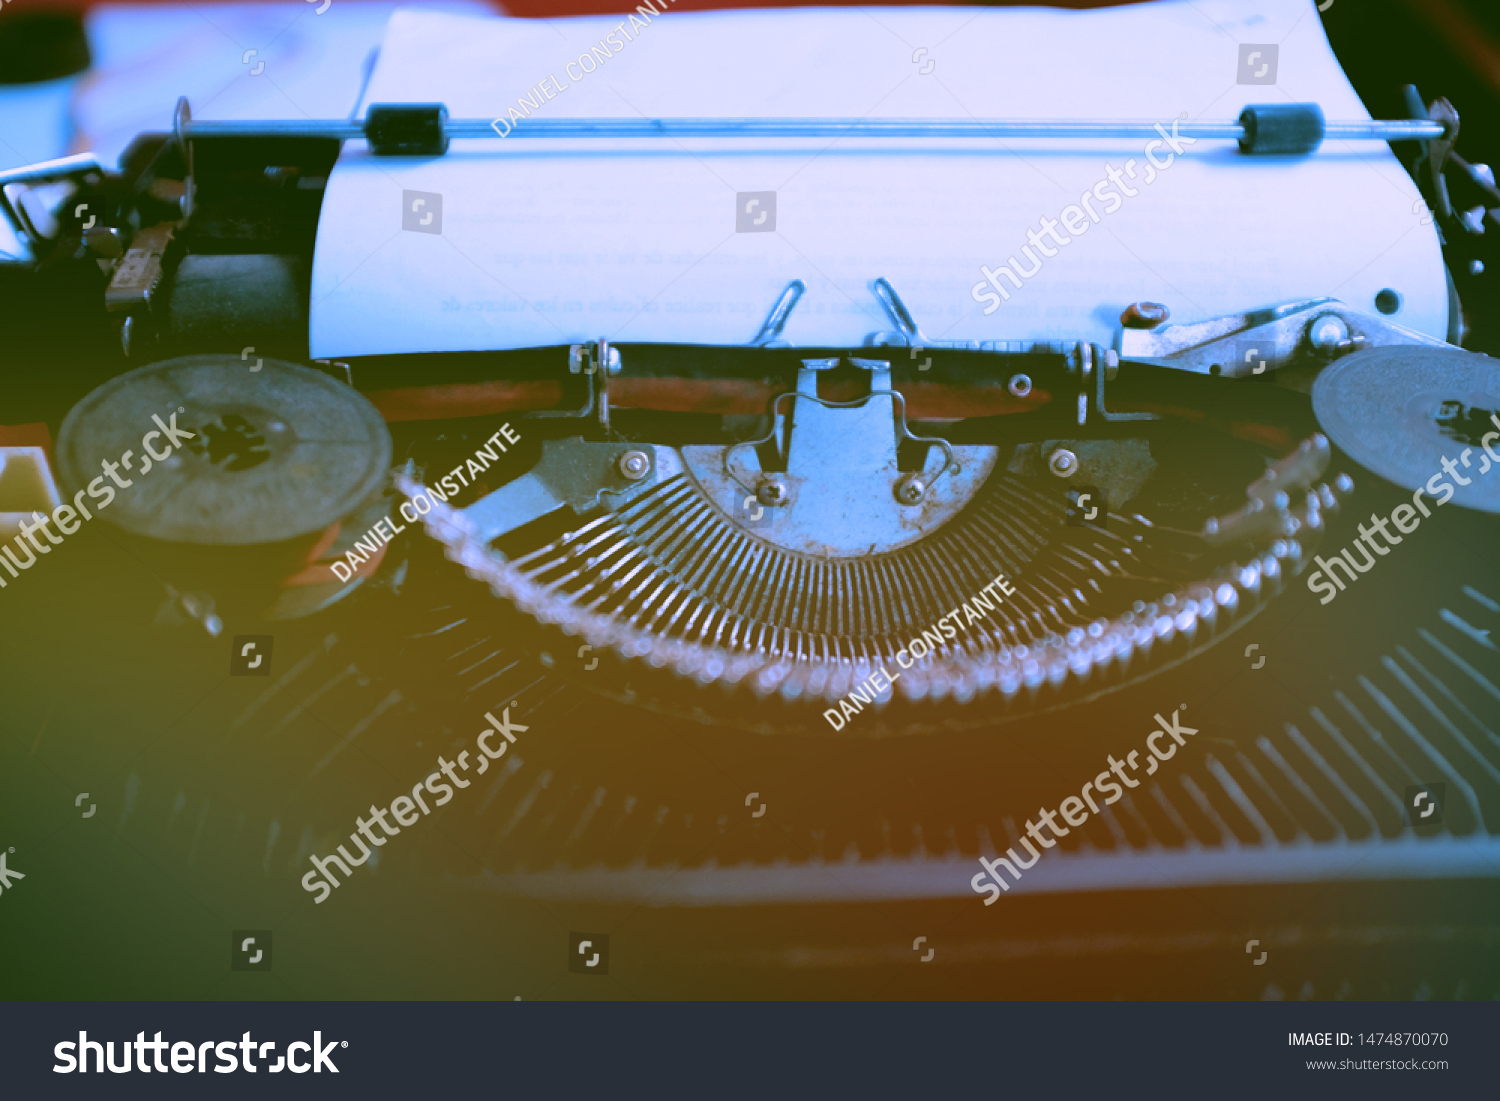 Old Manual Typewriters, the typewriter was a widely used device in previous years before the arrival of advanced electronics and computers. Ilove vintage #1474870070